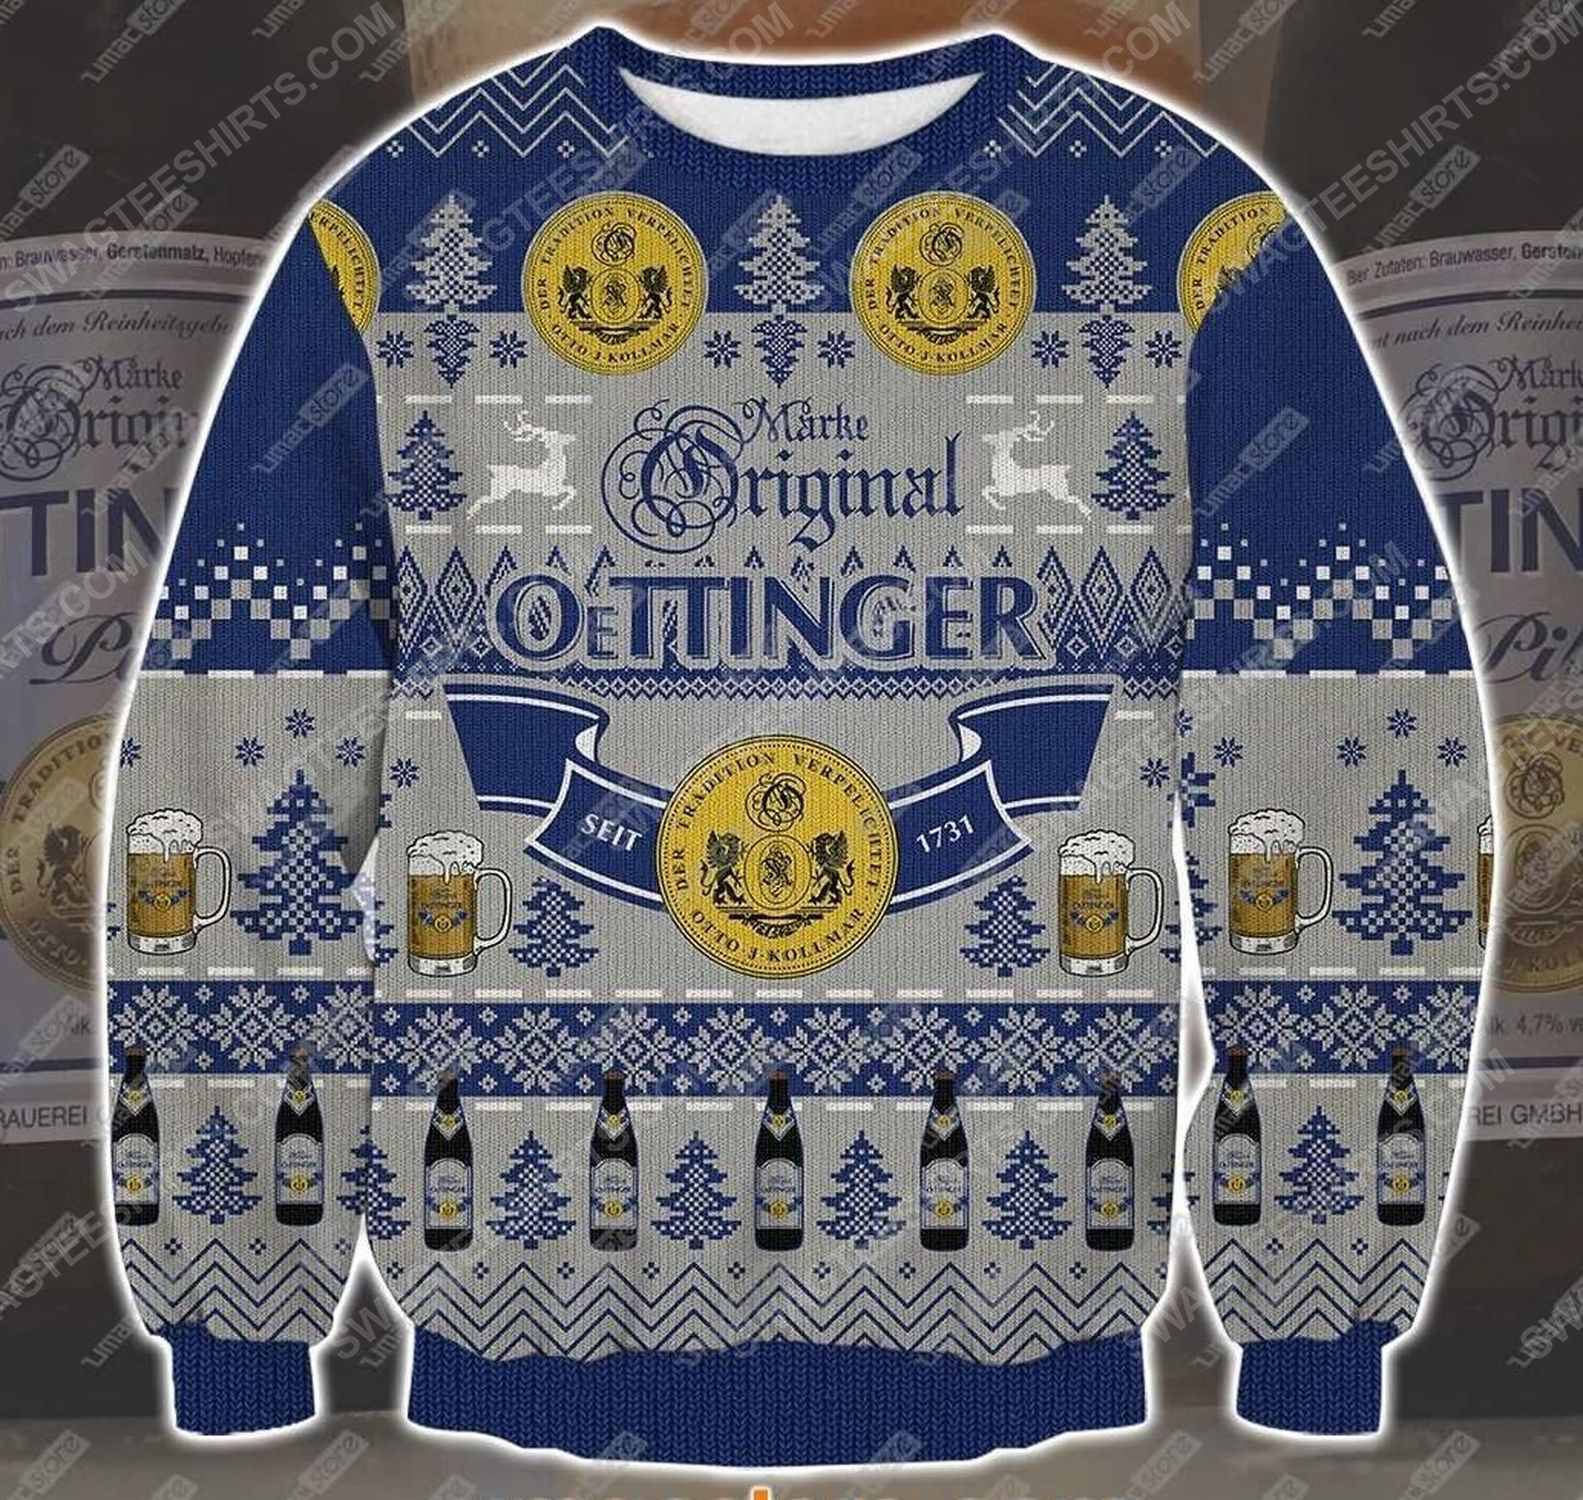 [special edition] Make original oettinger brewery ugly christmas sweater – maria